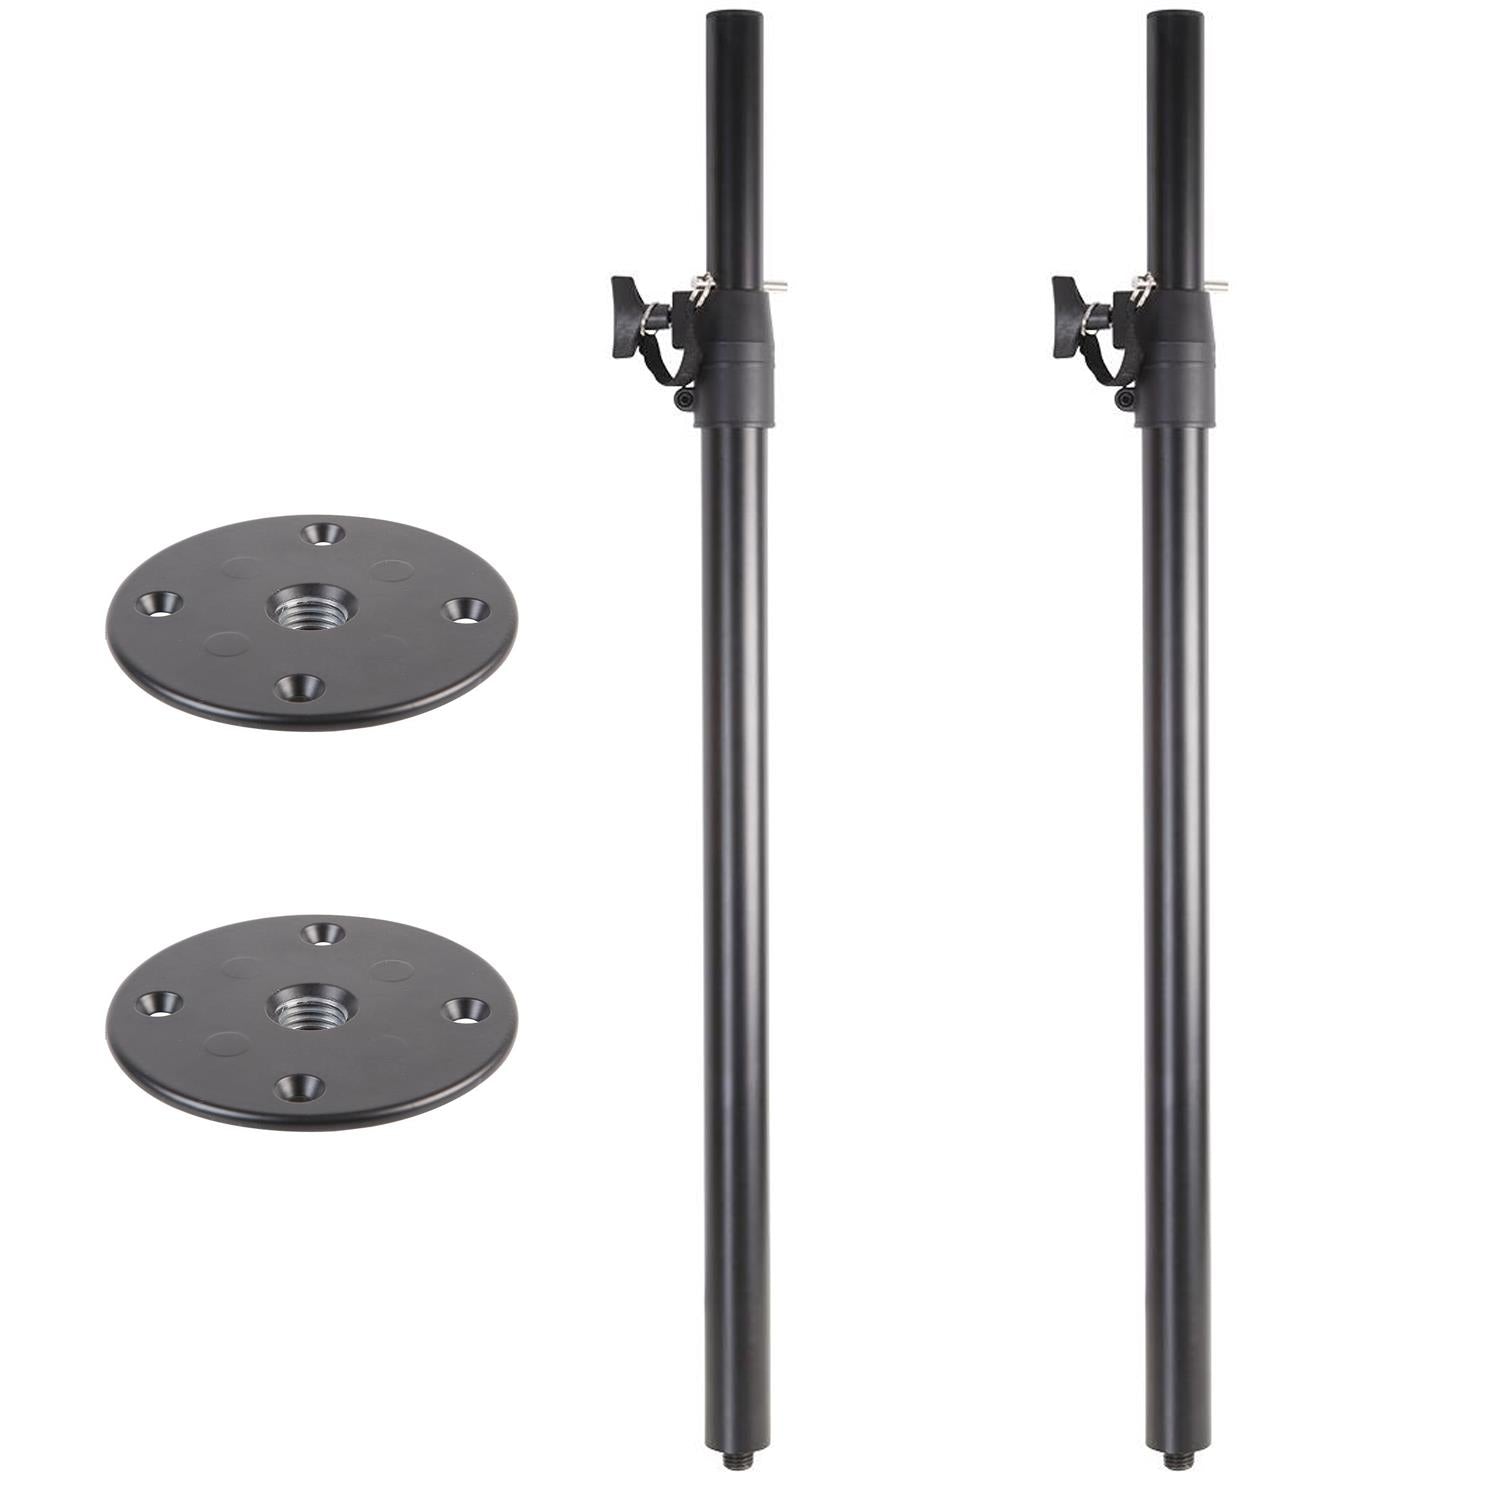 2 x M20 Threaded Plate with M20 to 35mm Speaker Pole